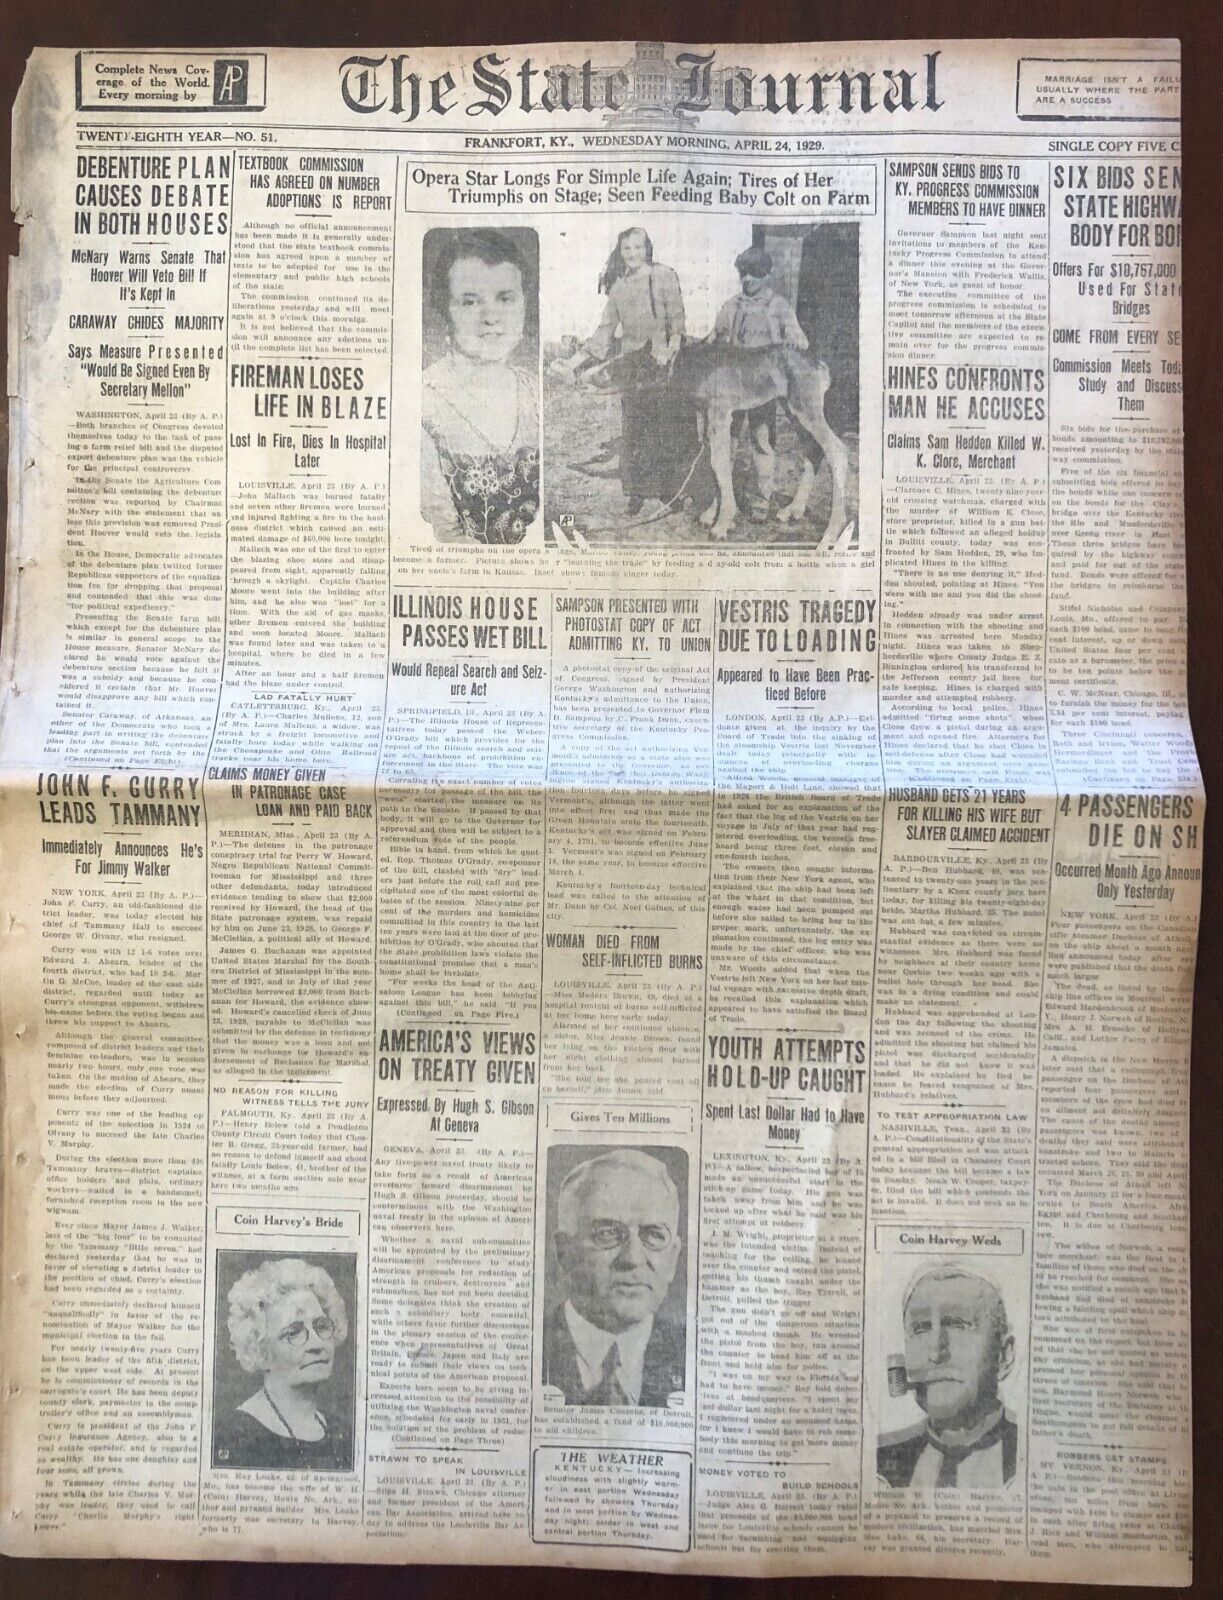 April 24, 1929 Frankfort KY Newspaper The State Journal Illinois Passes Wet Bill